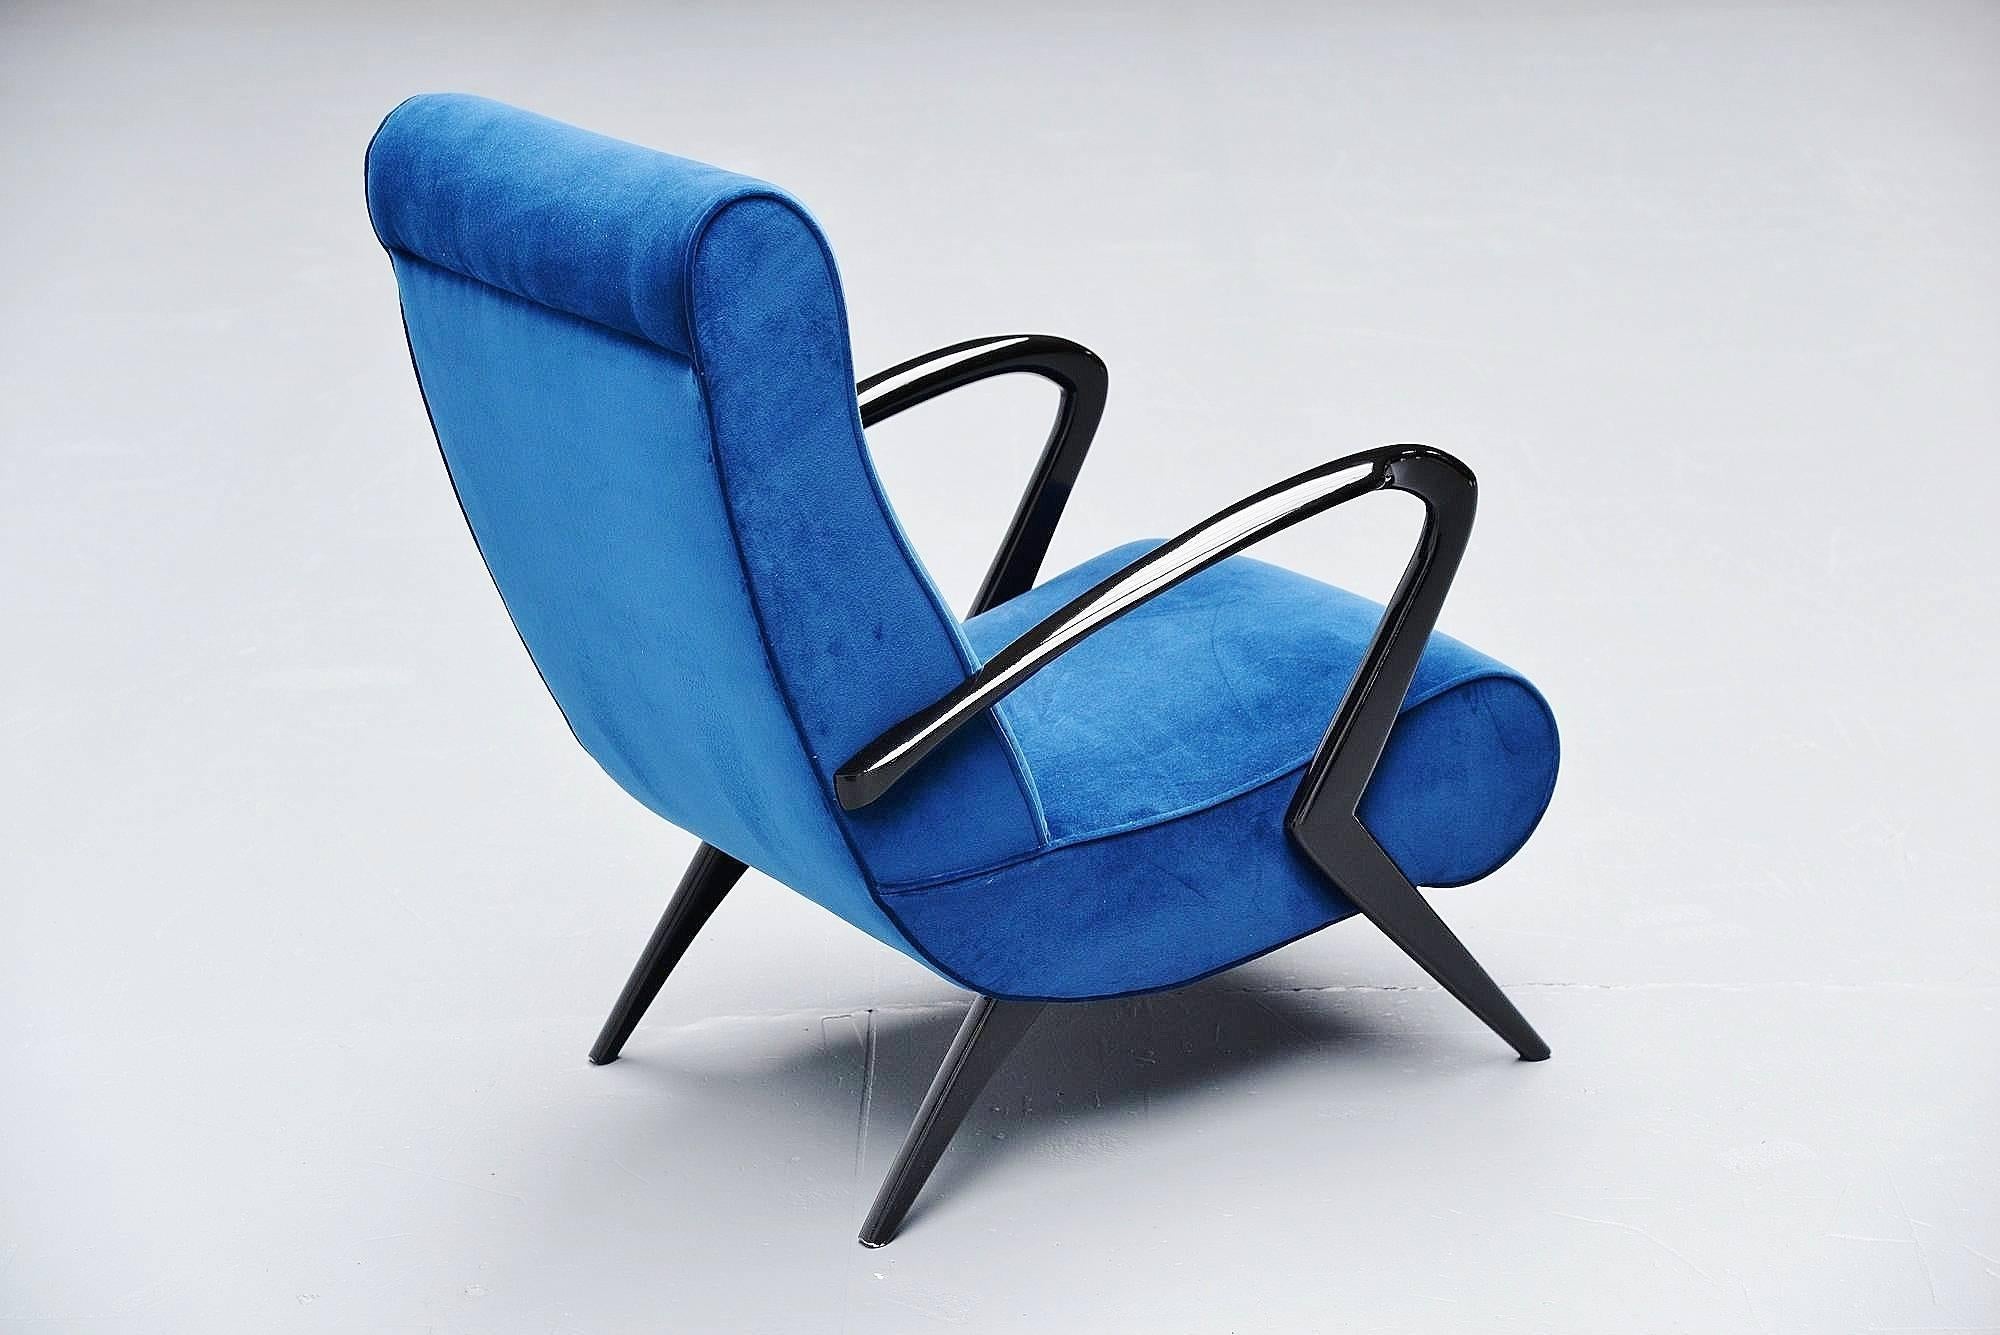 Mid-20th Century Italian Lounge Chairs in the Manner of Gio Ponti, 1950